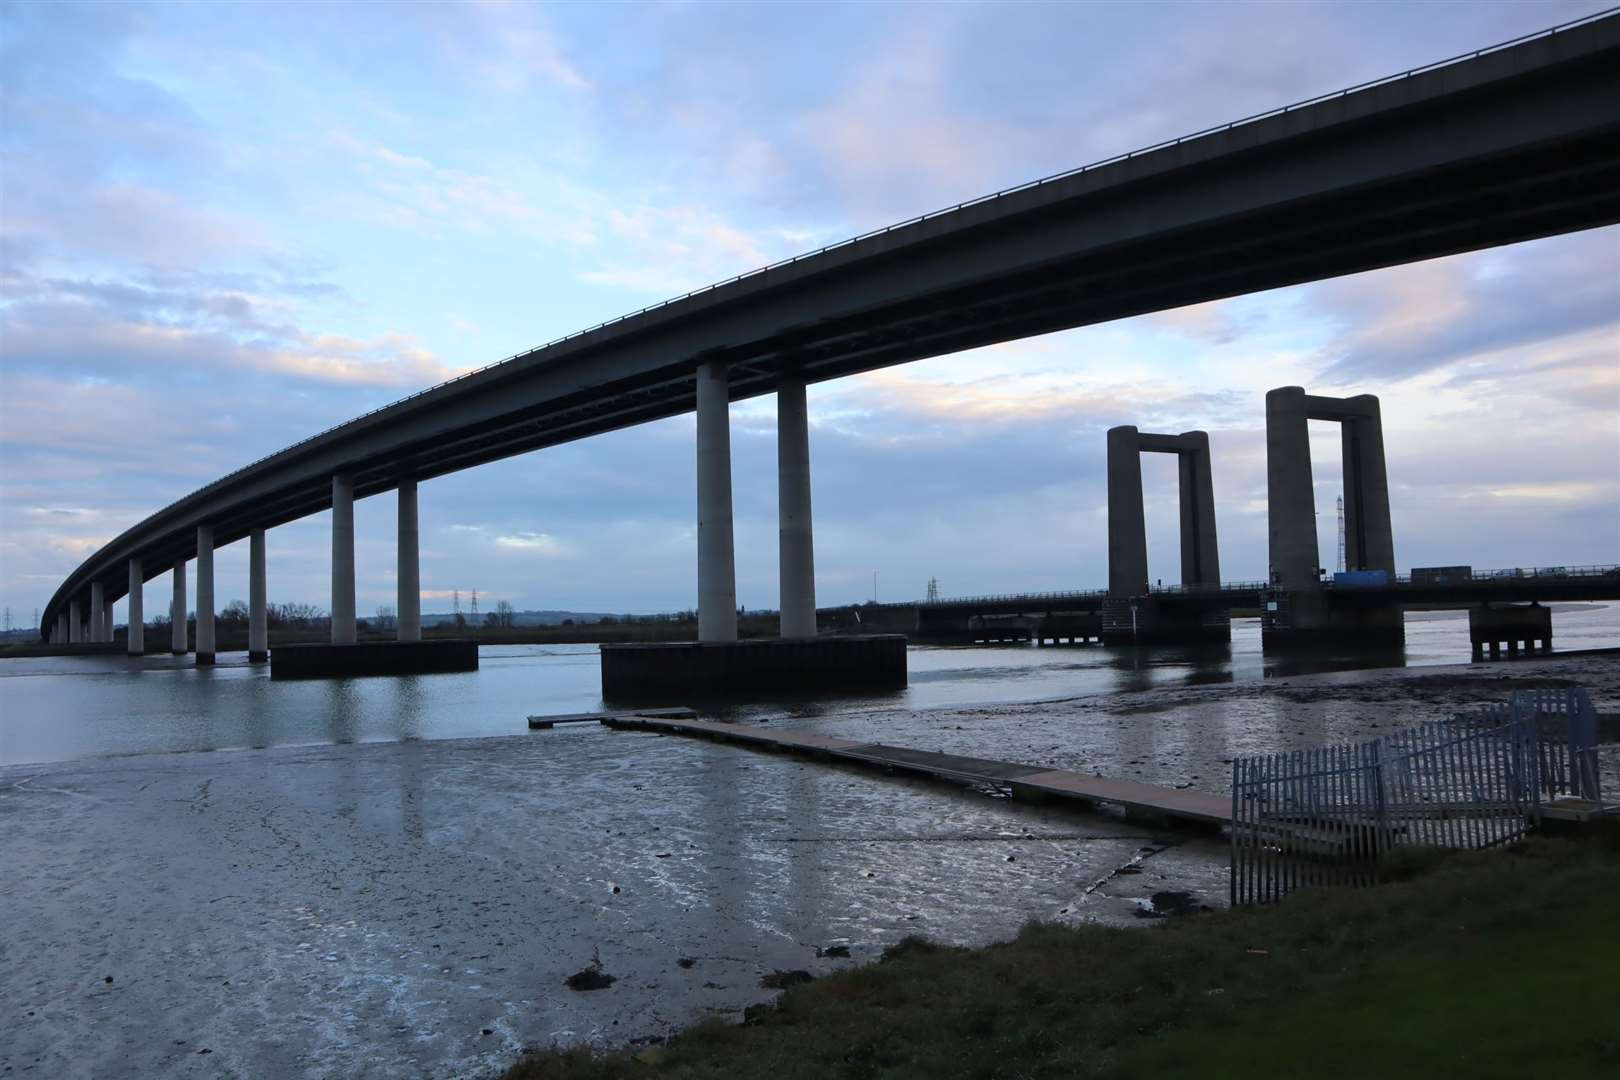 A tongue-in-cheek petition is calling for the likes of the Isle of Sheppey to be separated from Kent by a hard border